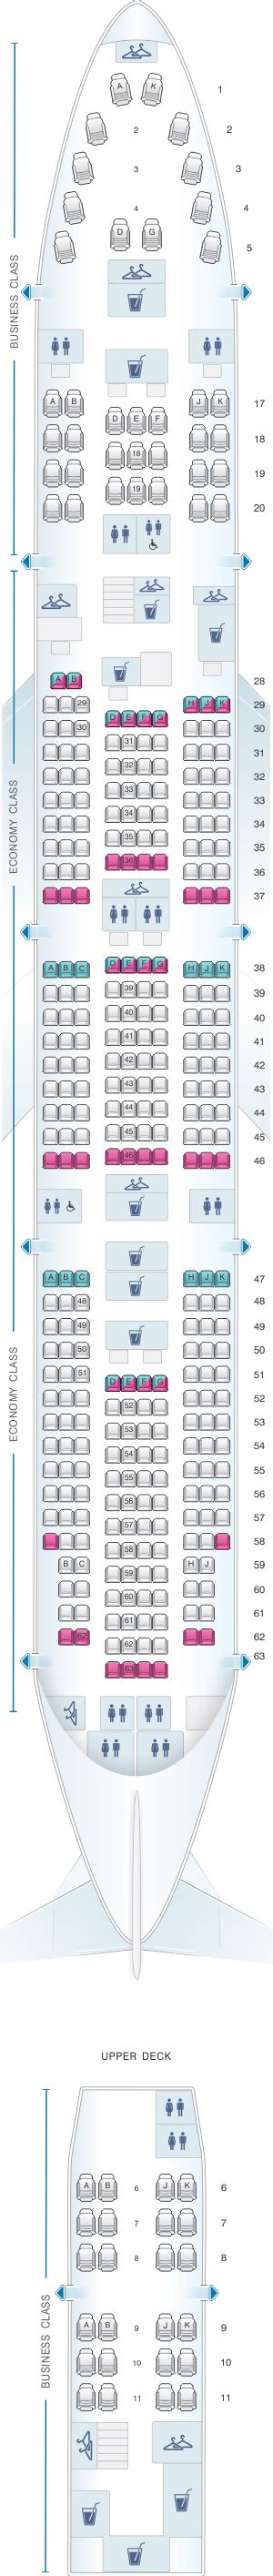 China Airlines A350 Seat Map Tutor Suhu